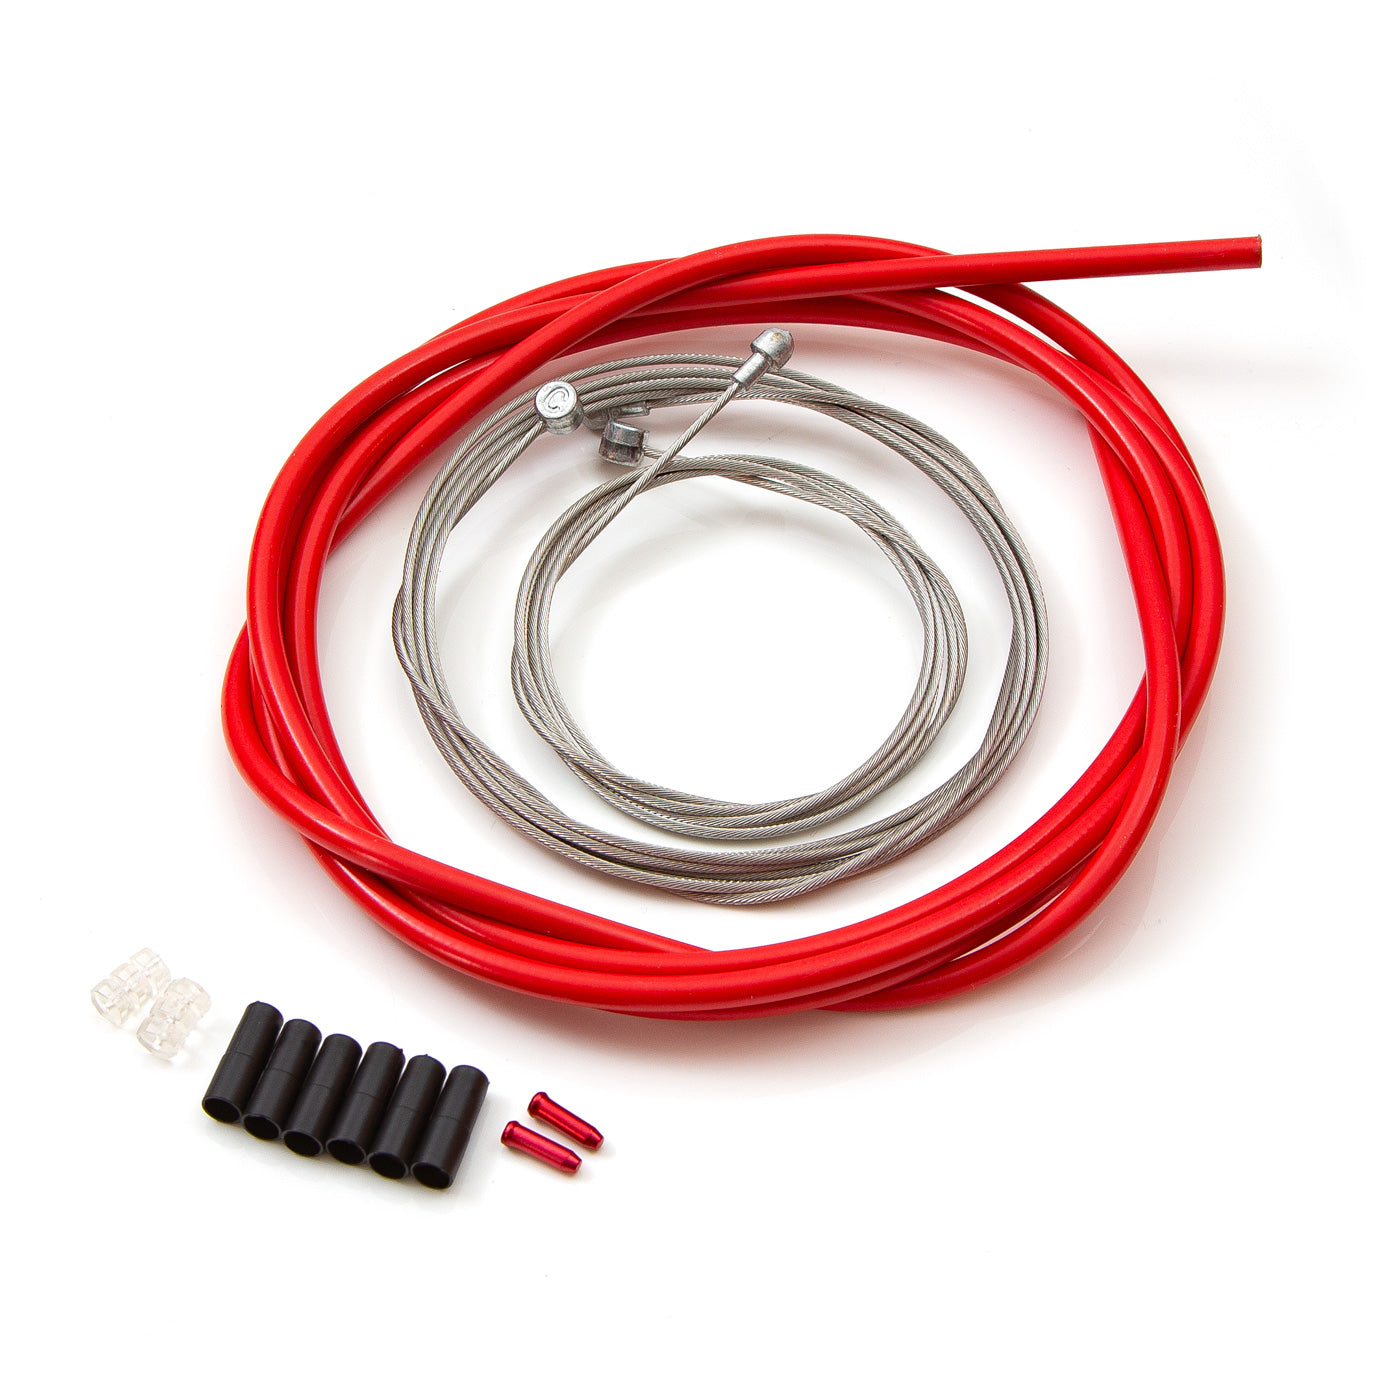 View Clarks Stainless Steel Brake Cable Kit Red information